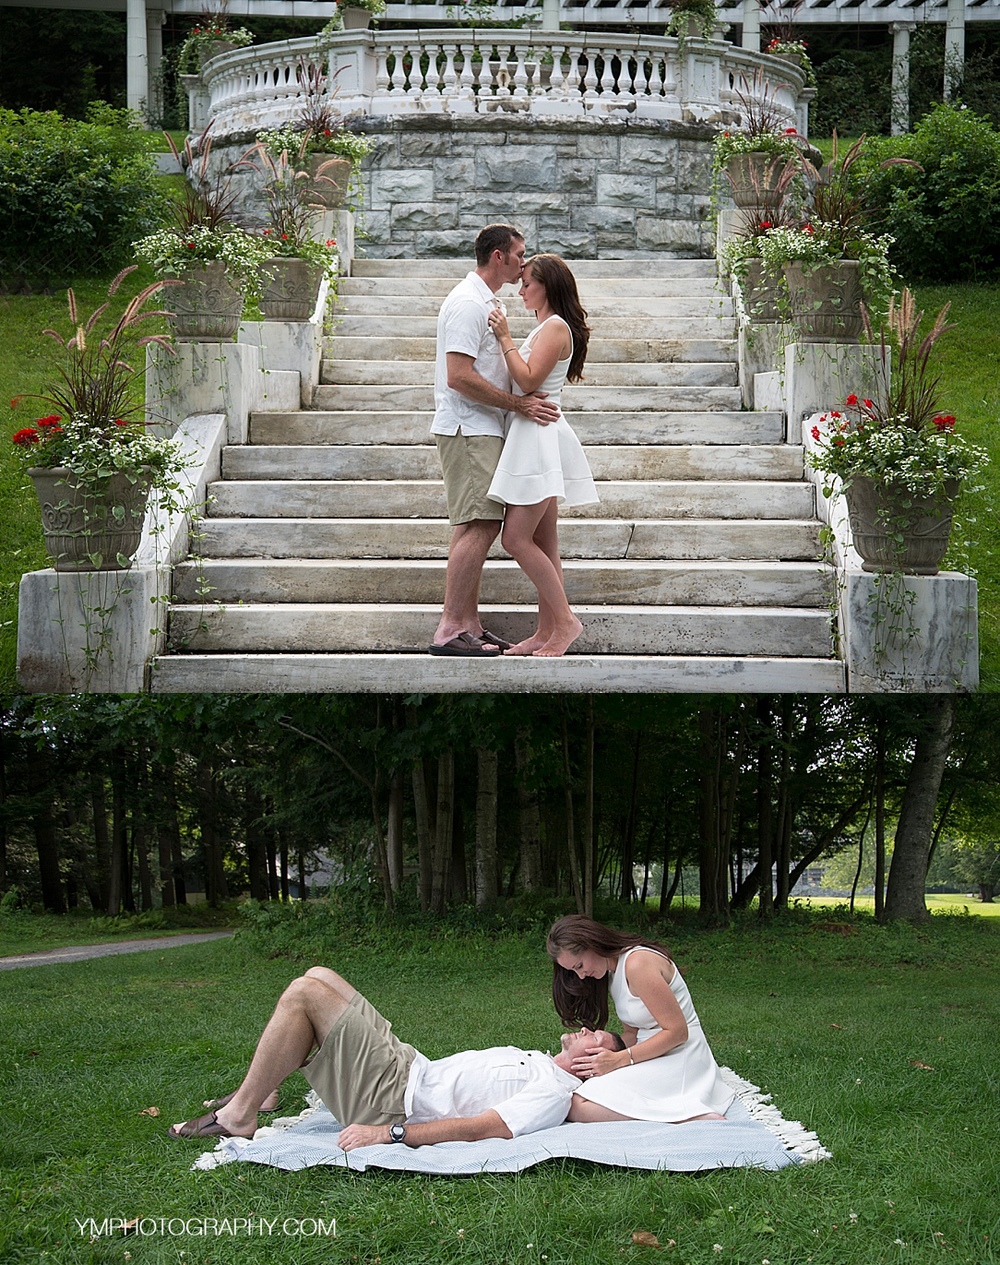  Saratoga Springs, NY Engagement Session  © ymphotography 2015 www.ymphotography.com 